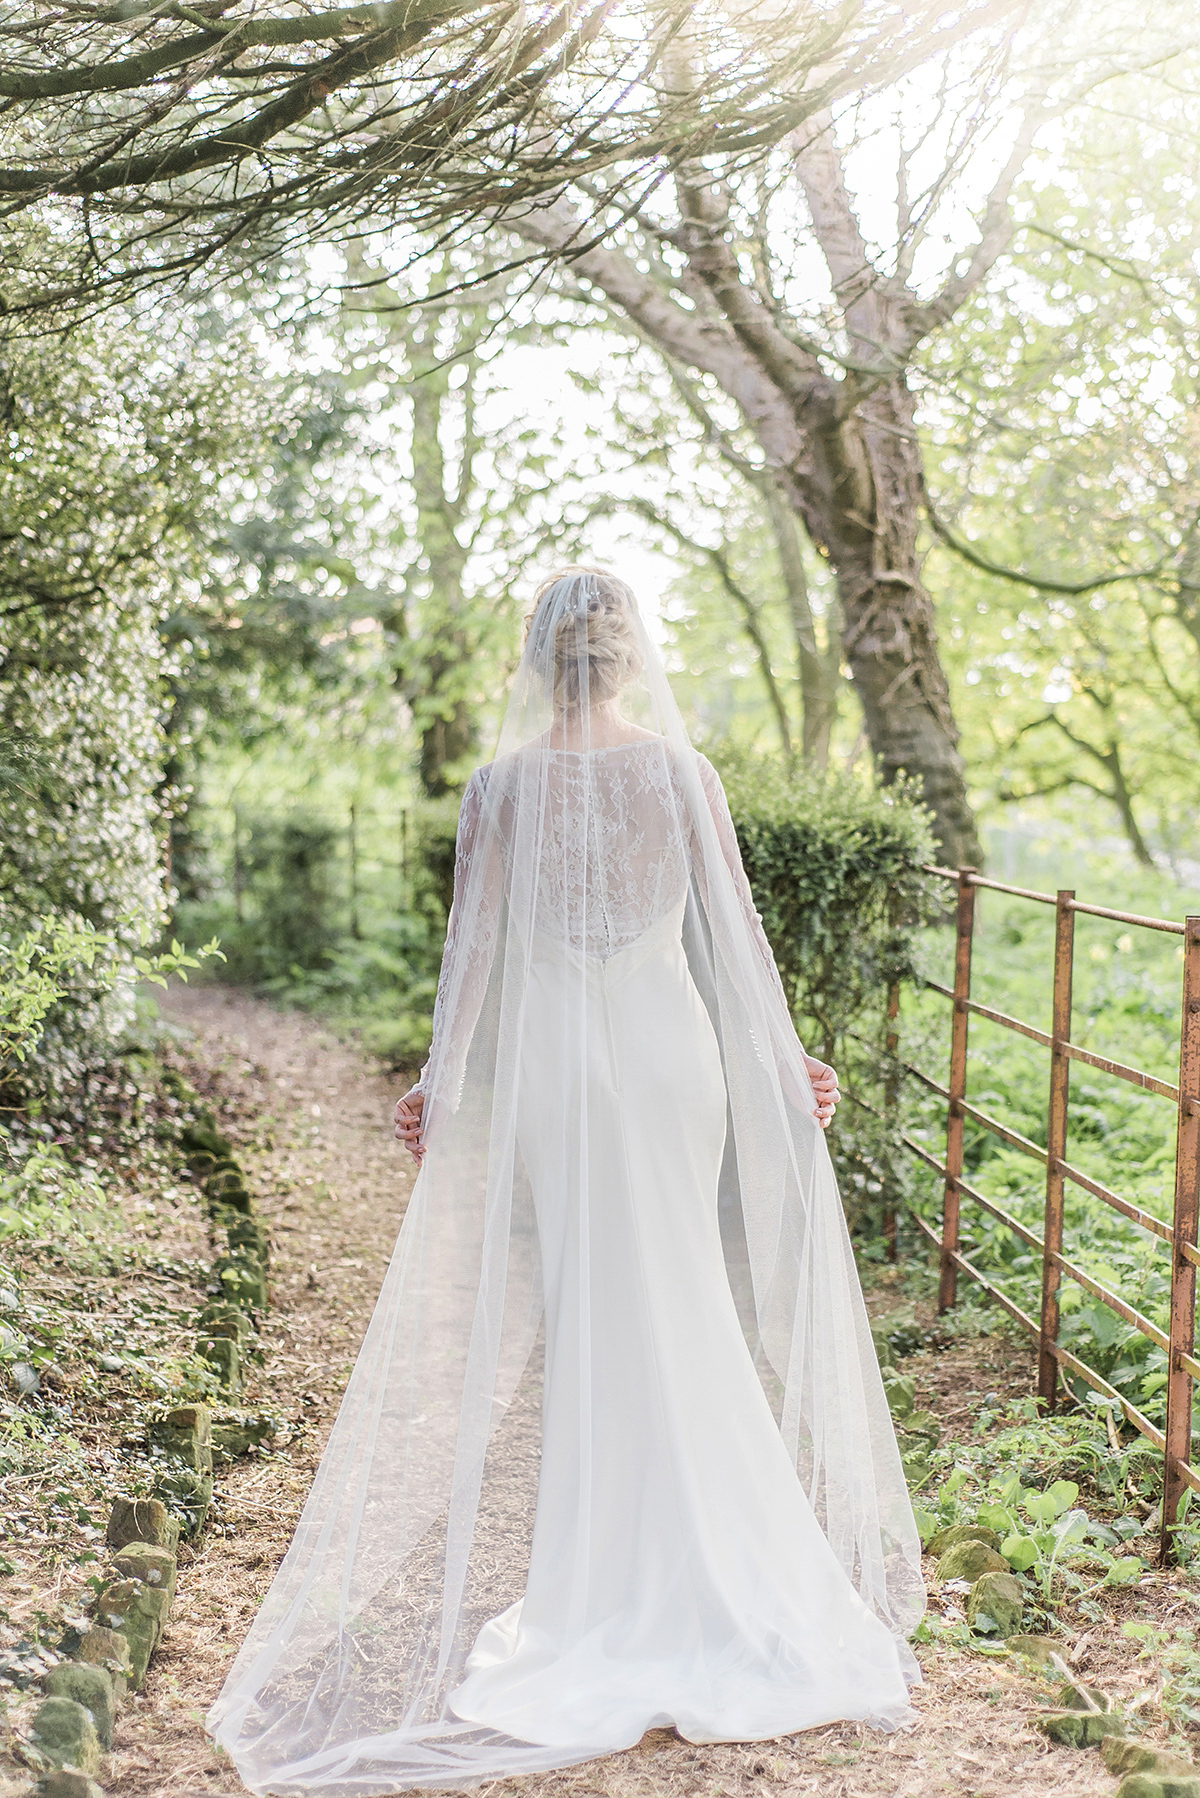 English elegance at Dunsley Hall country house hotel wedding venue in Whitby, North Yorkshire. Photography by Georgina Harrison.